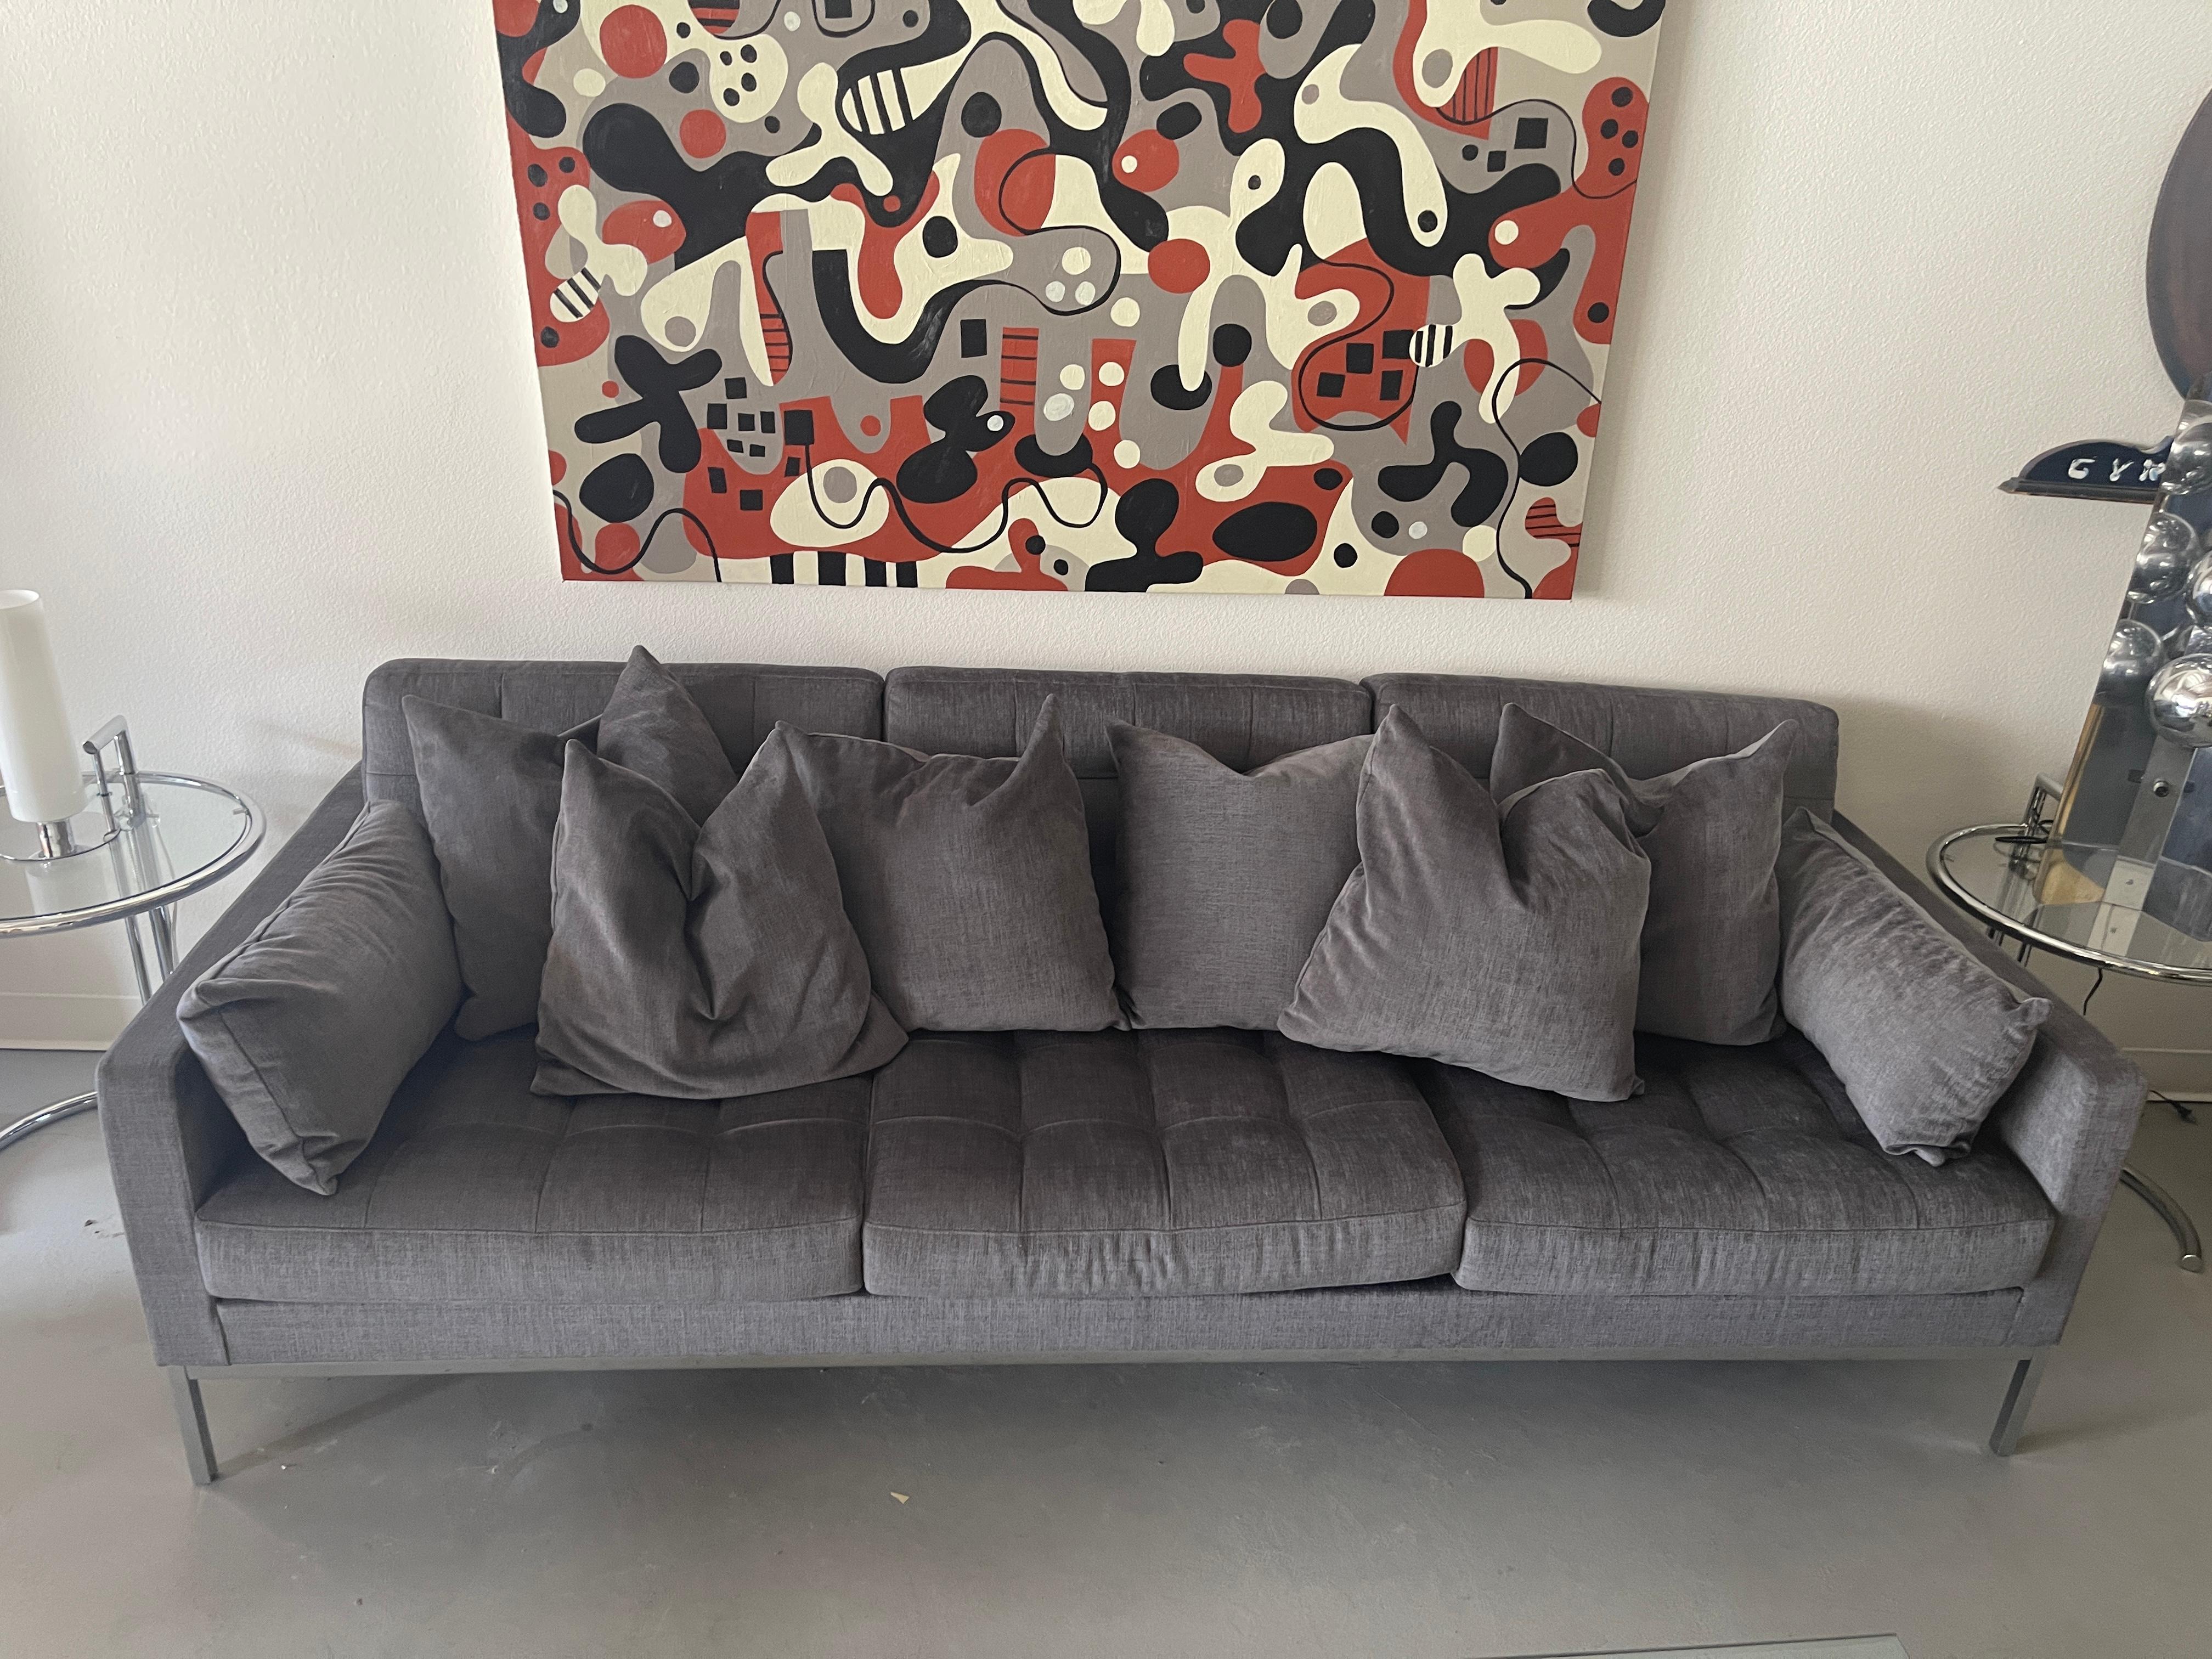 Beautiful Florence knoll Relaxed Sofa with custom cushions added. This sofa was purchased directly from knoll in 2019 and extra fabric ordered. The fabric is a grey chenille. We're not sure of the name. The owner then had custom down cushions made